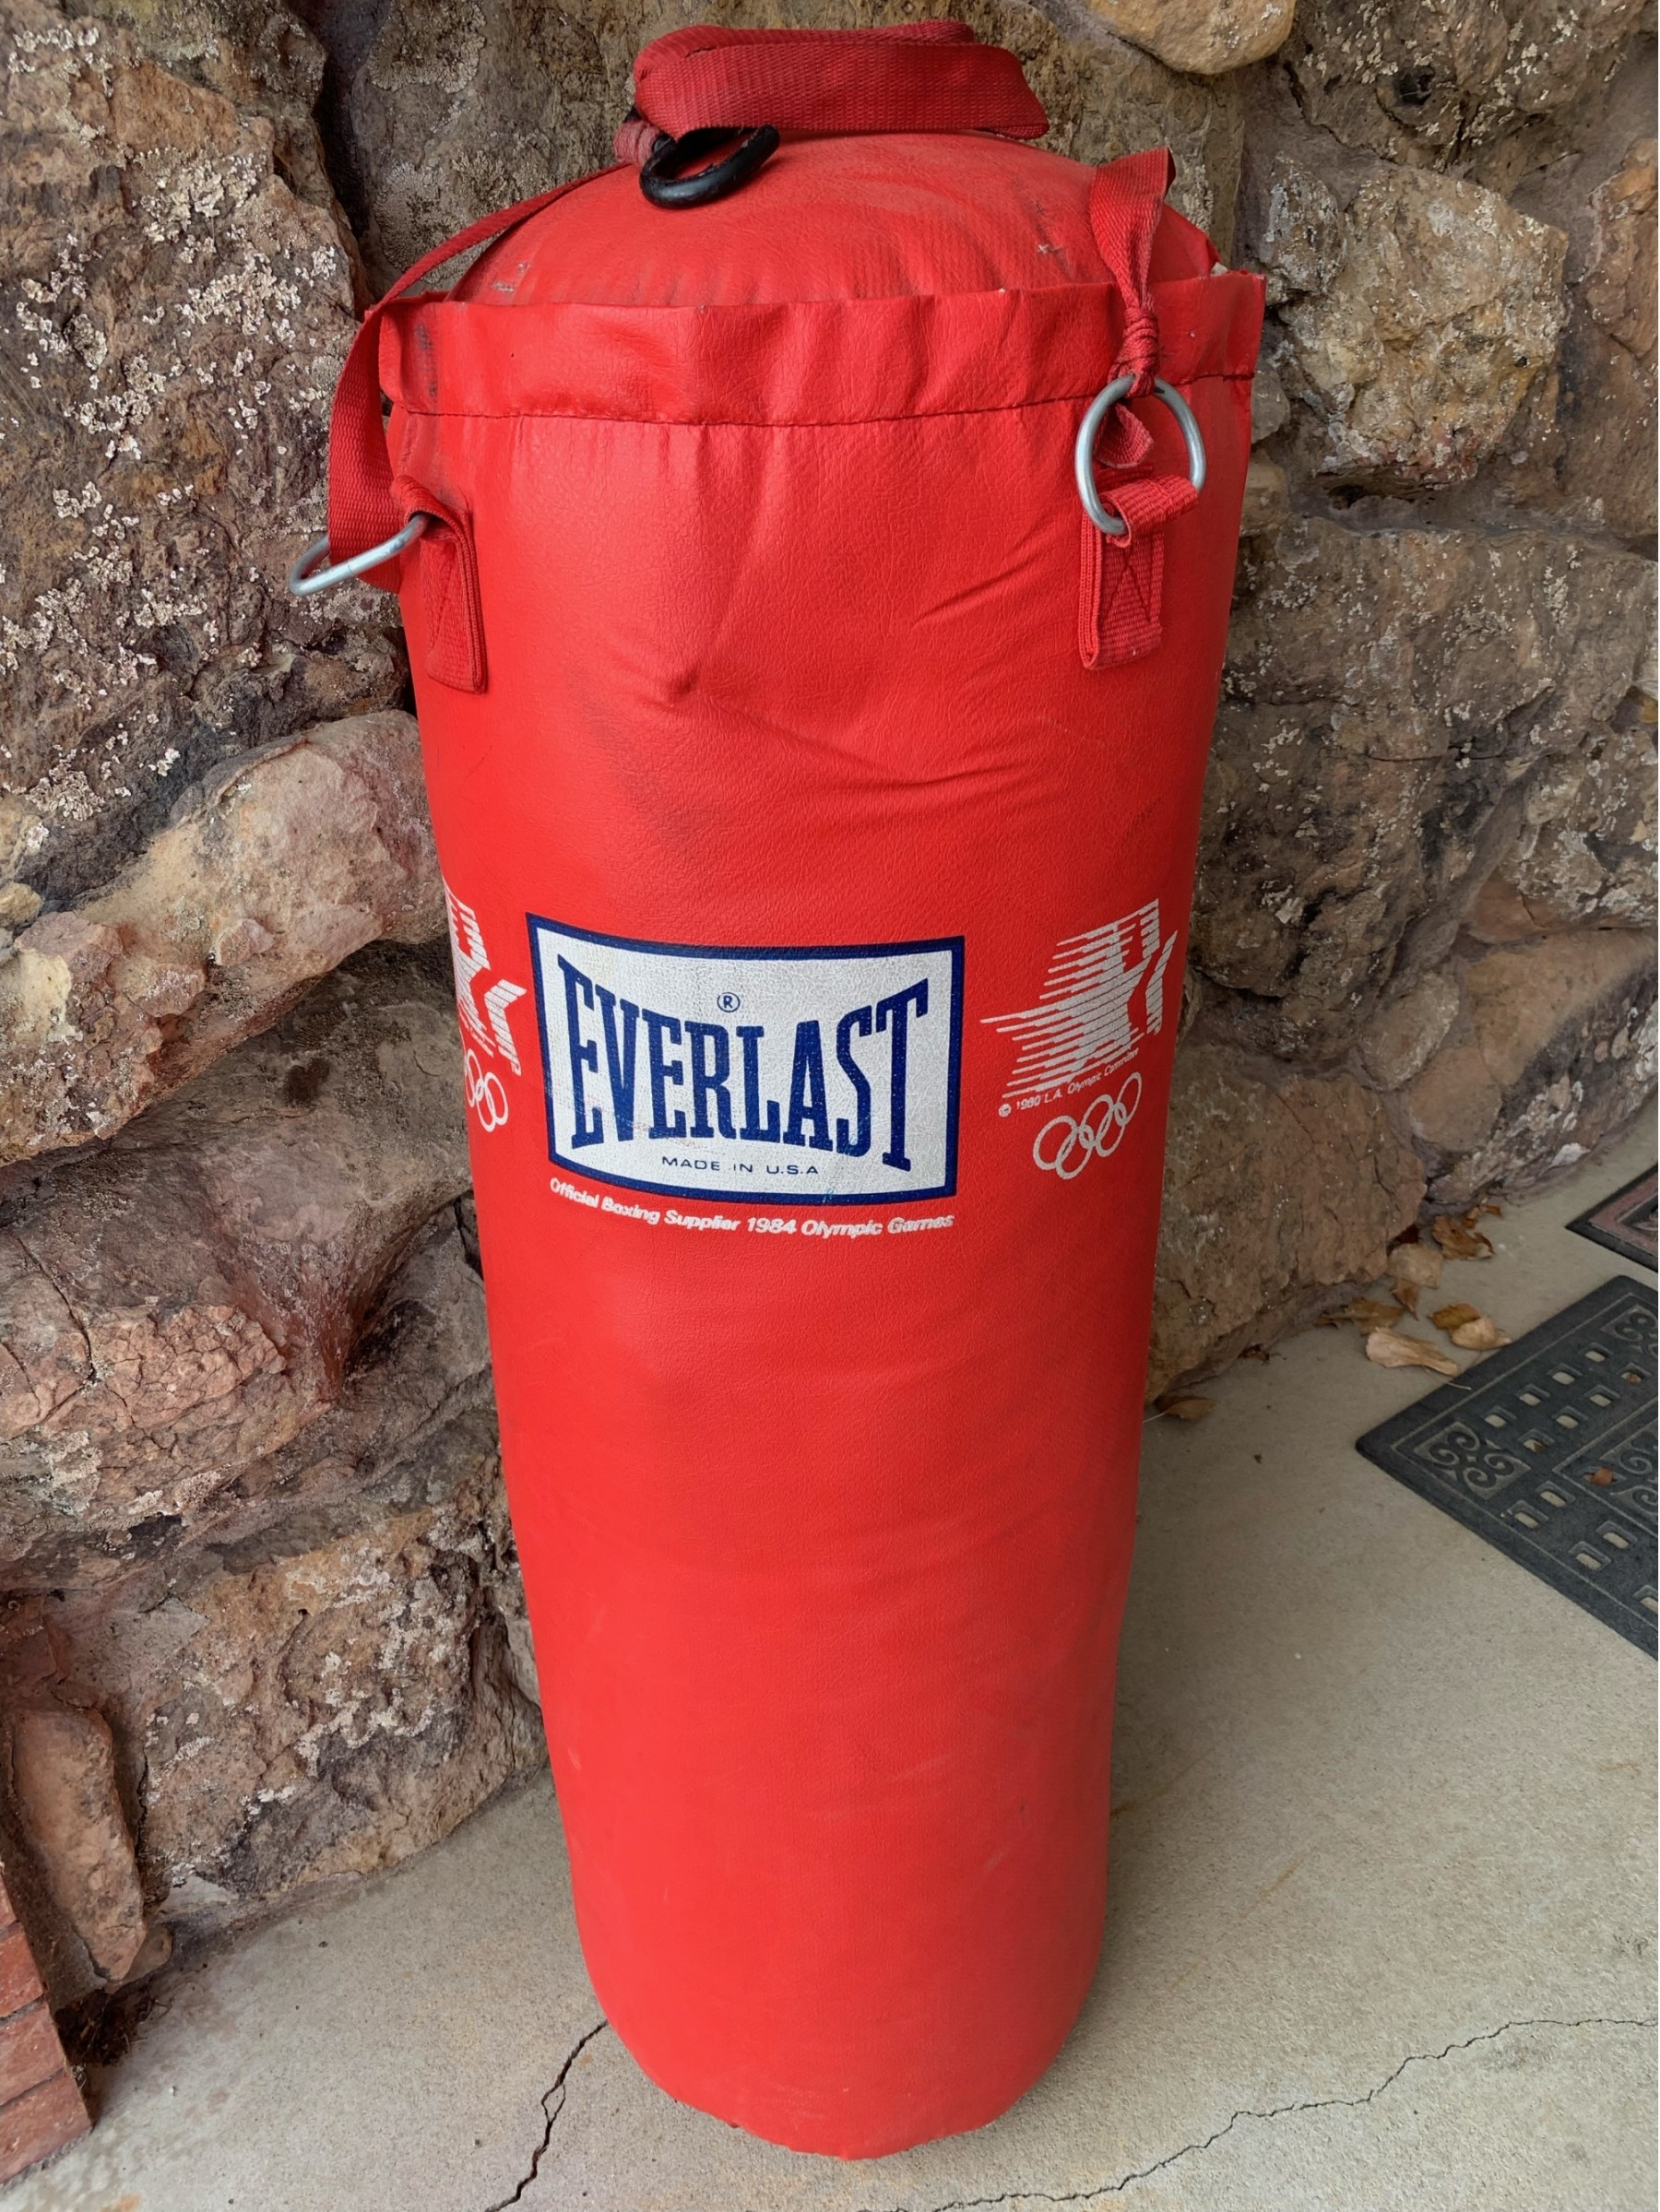 EVERLAST PUNCHING BAG / KICKBOXING, Sports Equipment, Exercise & Fitness,  Weights & Dumbells on Carousell